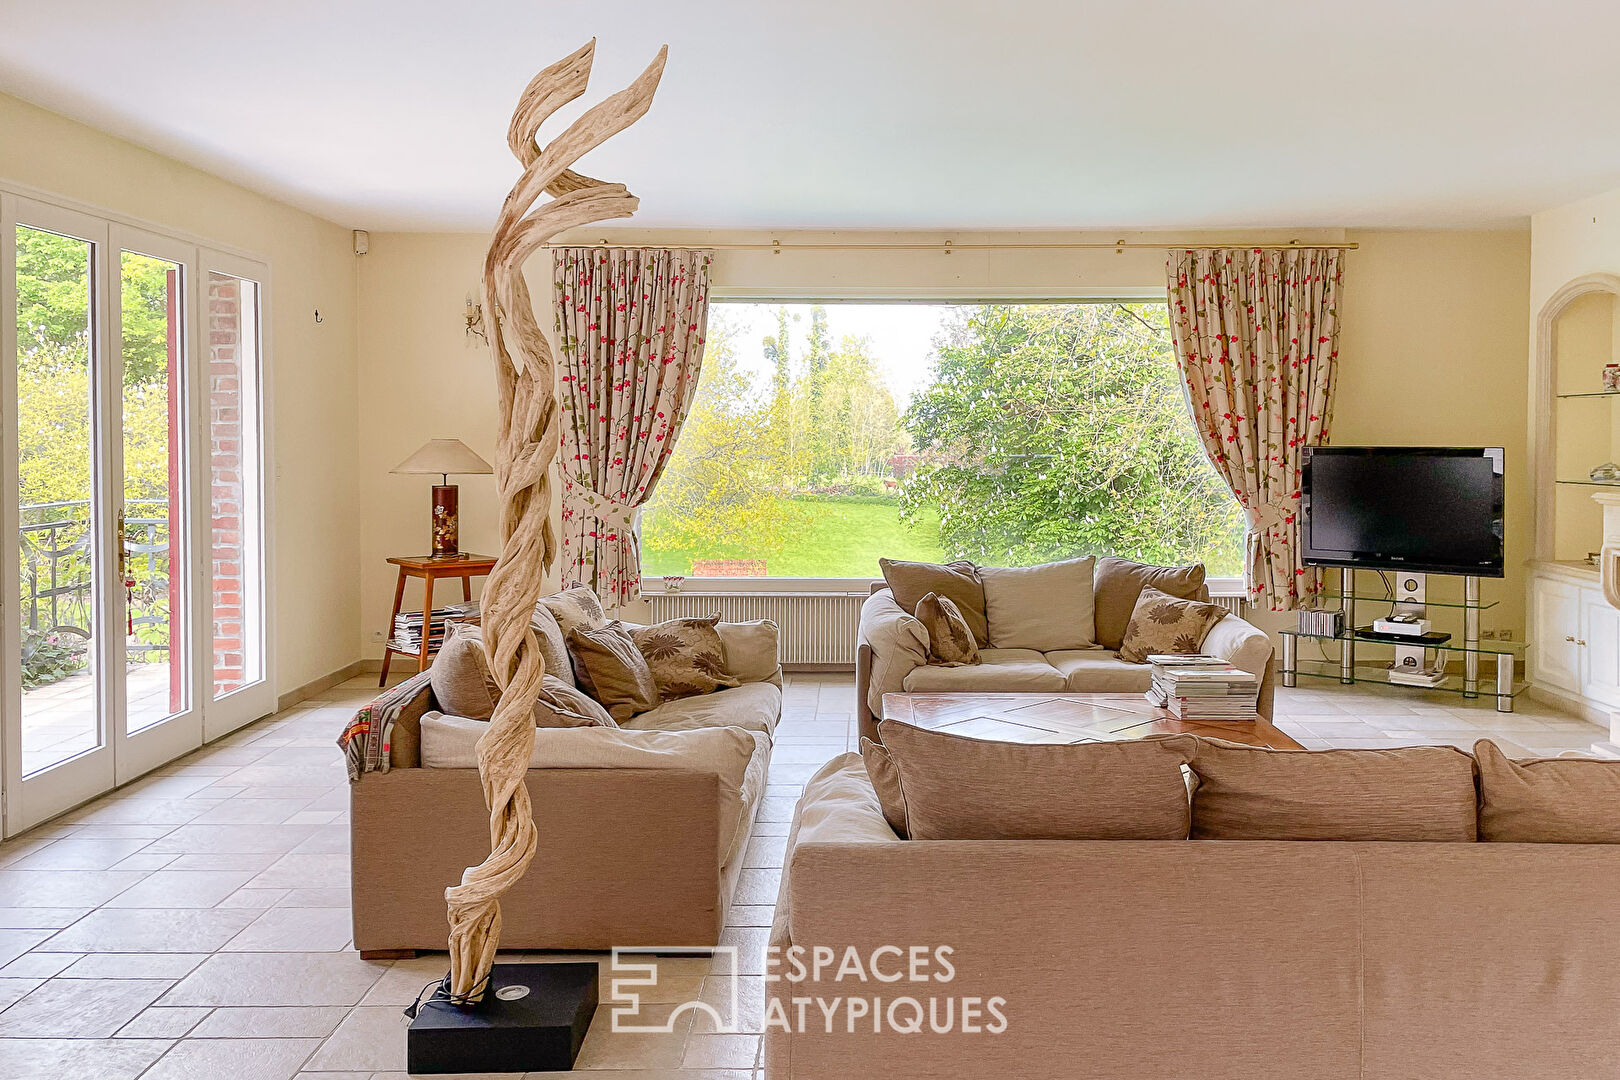 Sumptuous wooded property, calm and discreet.